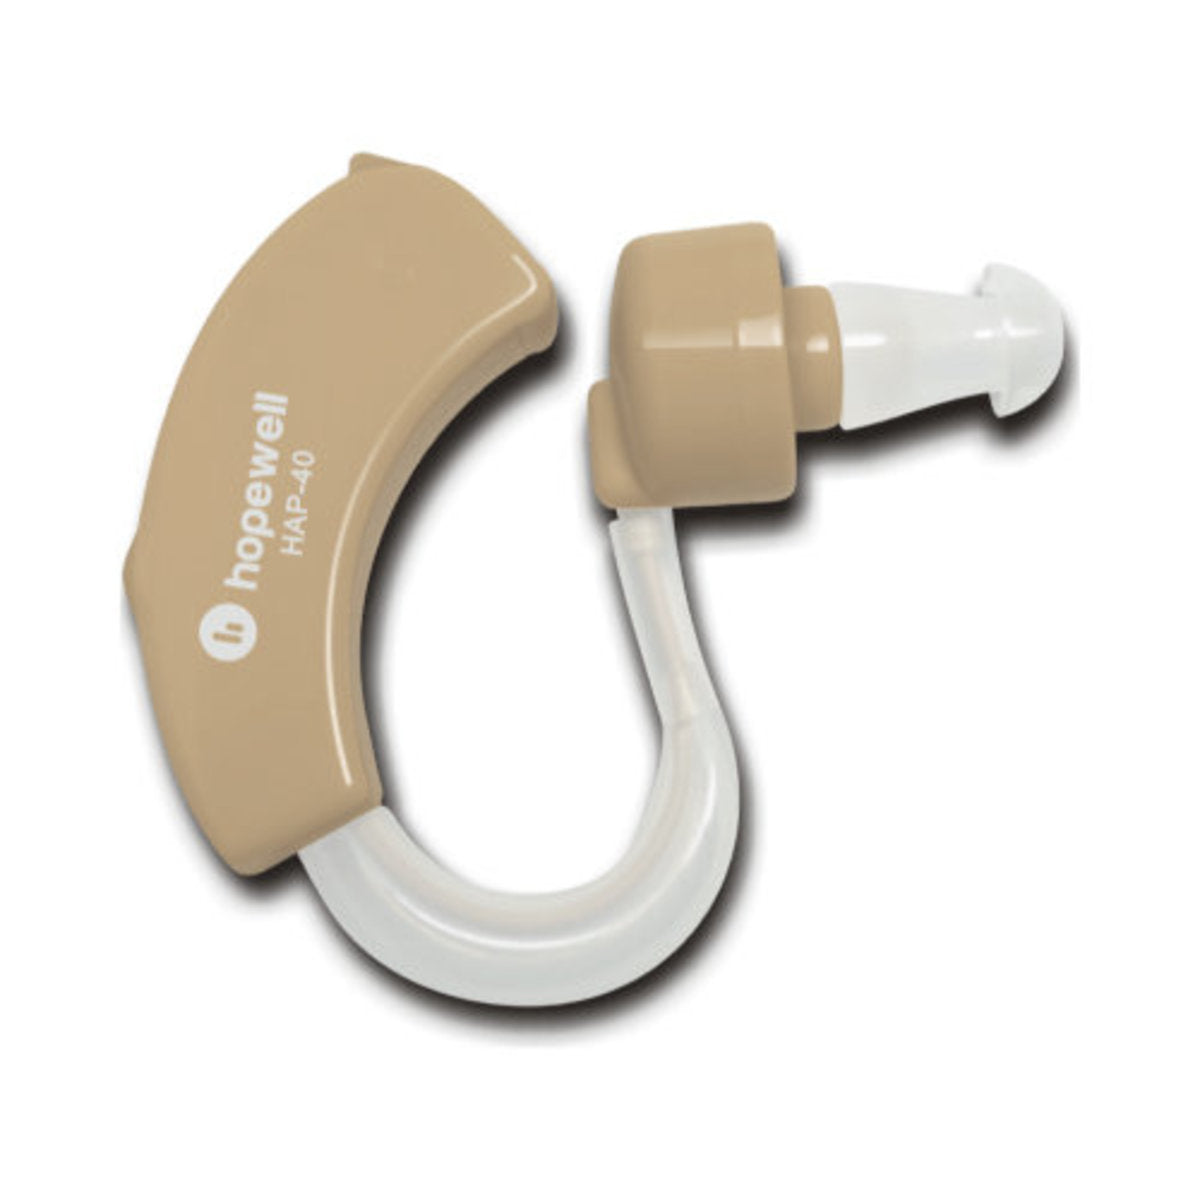 hopewell - HAP-40 (+130dB) over-the-ear hearing aid [Hong Kong licensed]